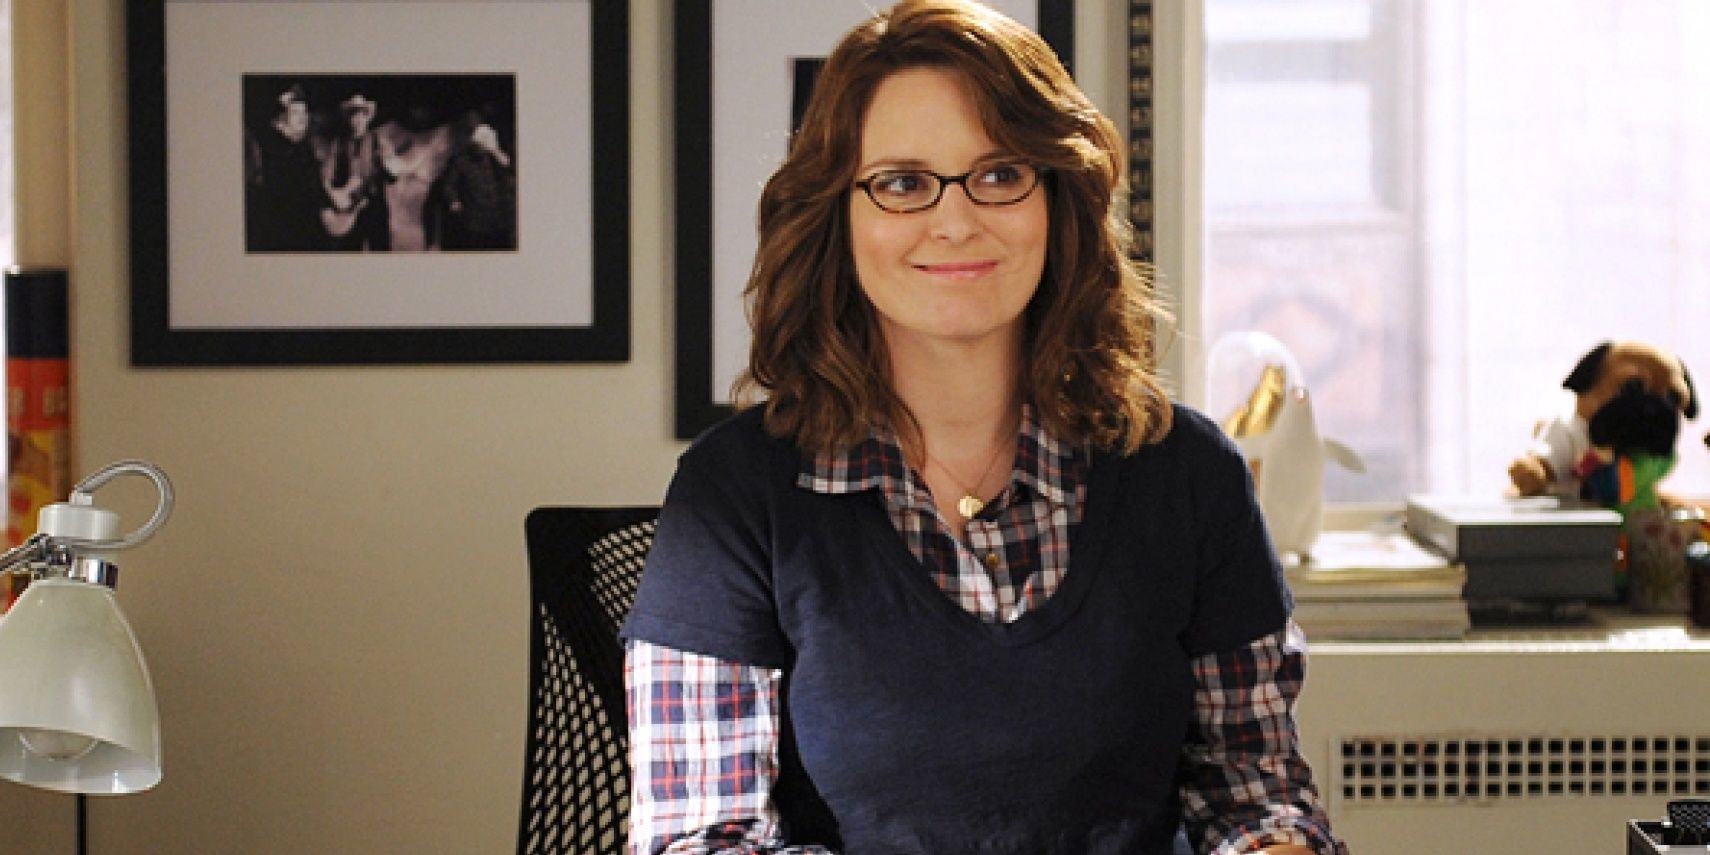 Tina Fey sitting at a desk and smiling in 30 Rock